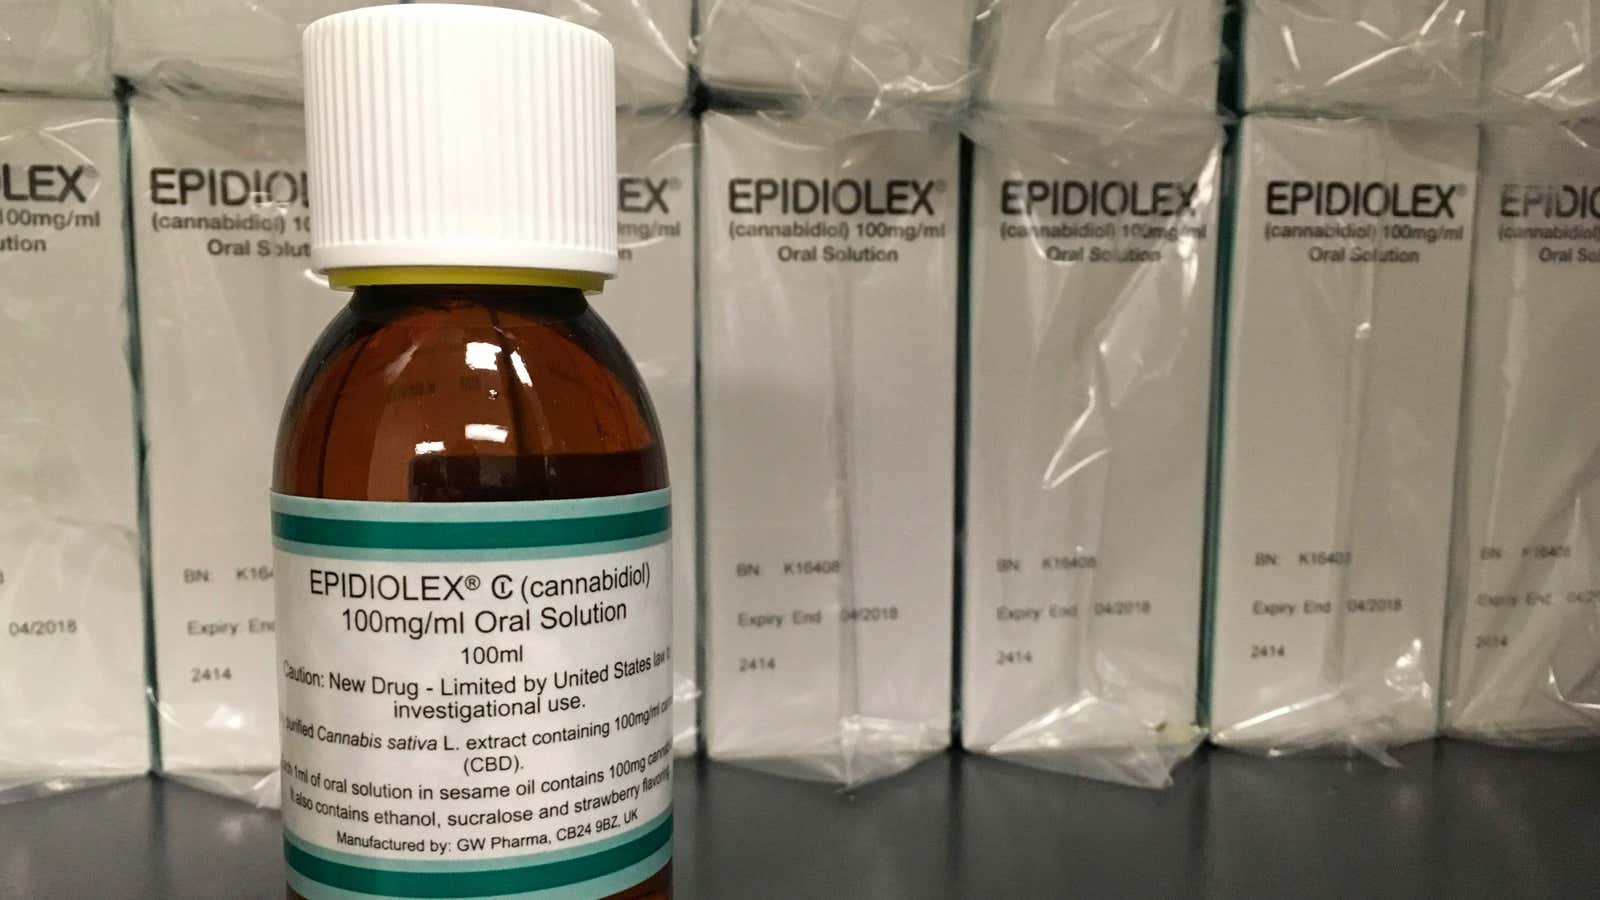 The drug is the first cannabinoid product approved by US regulators.